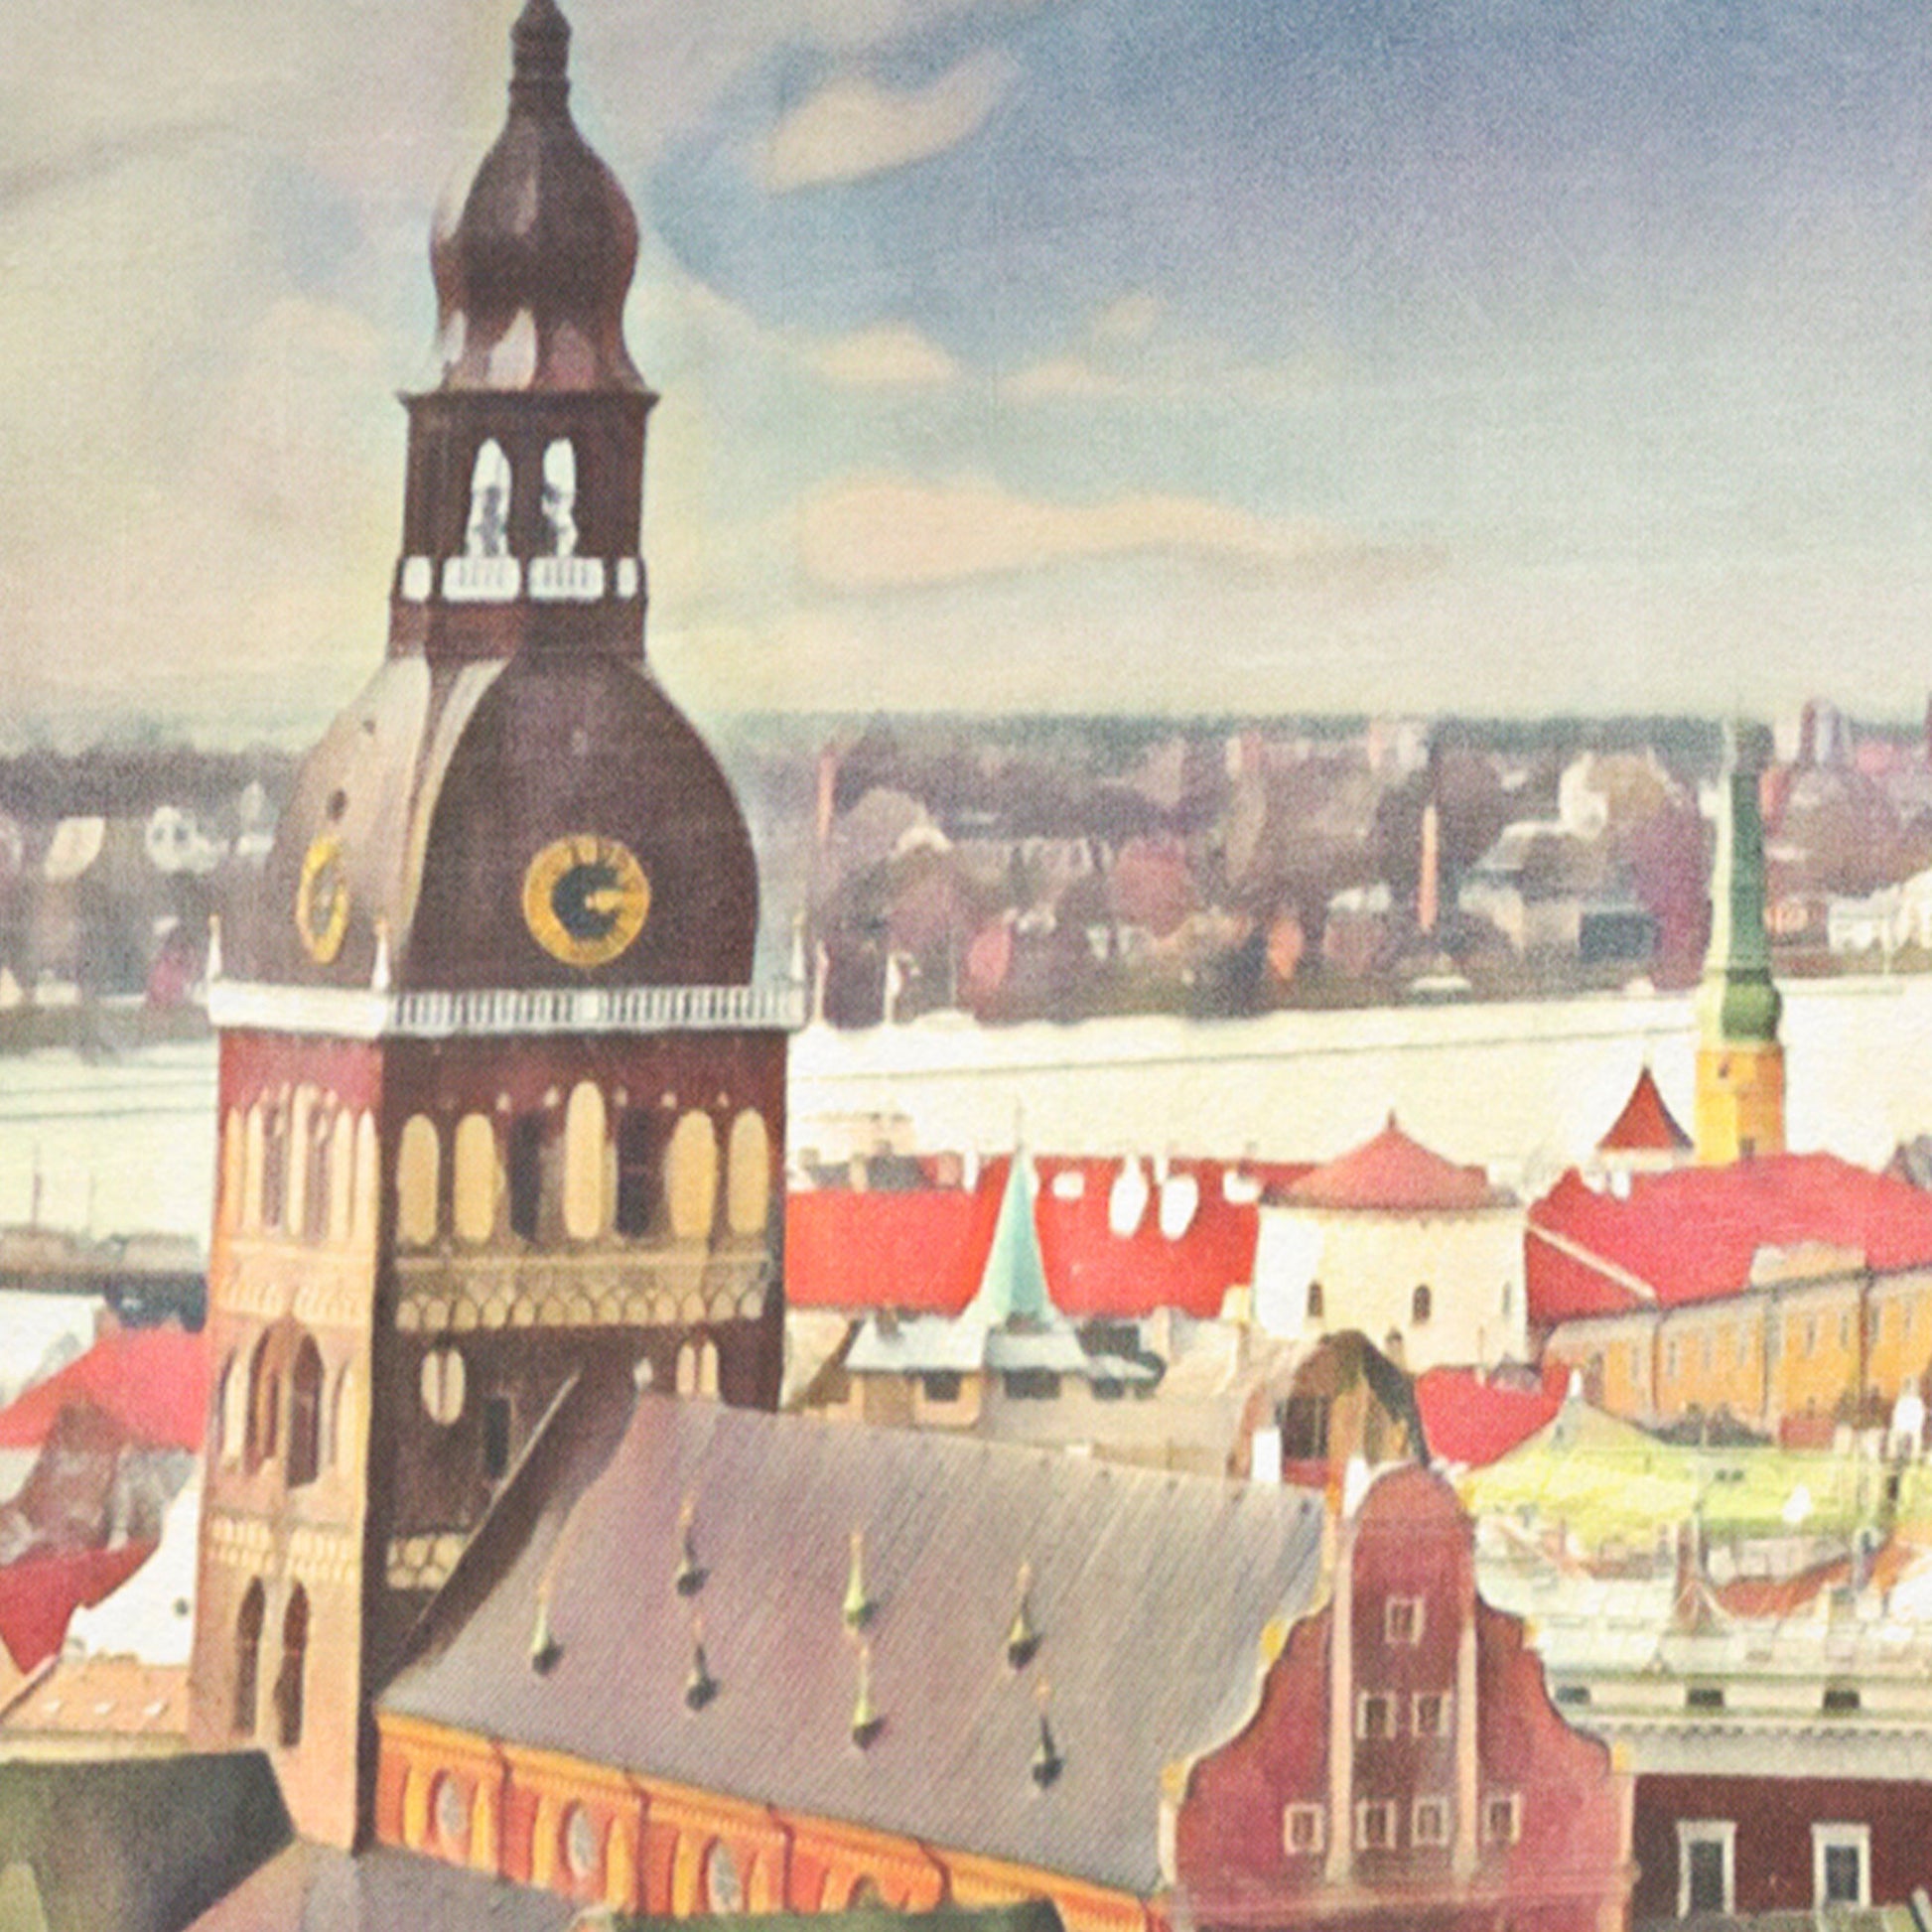 Details of the Riga poster of Latvia